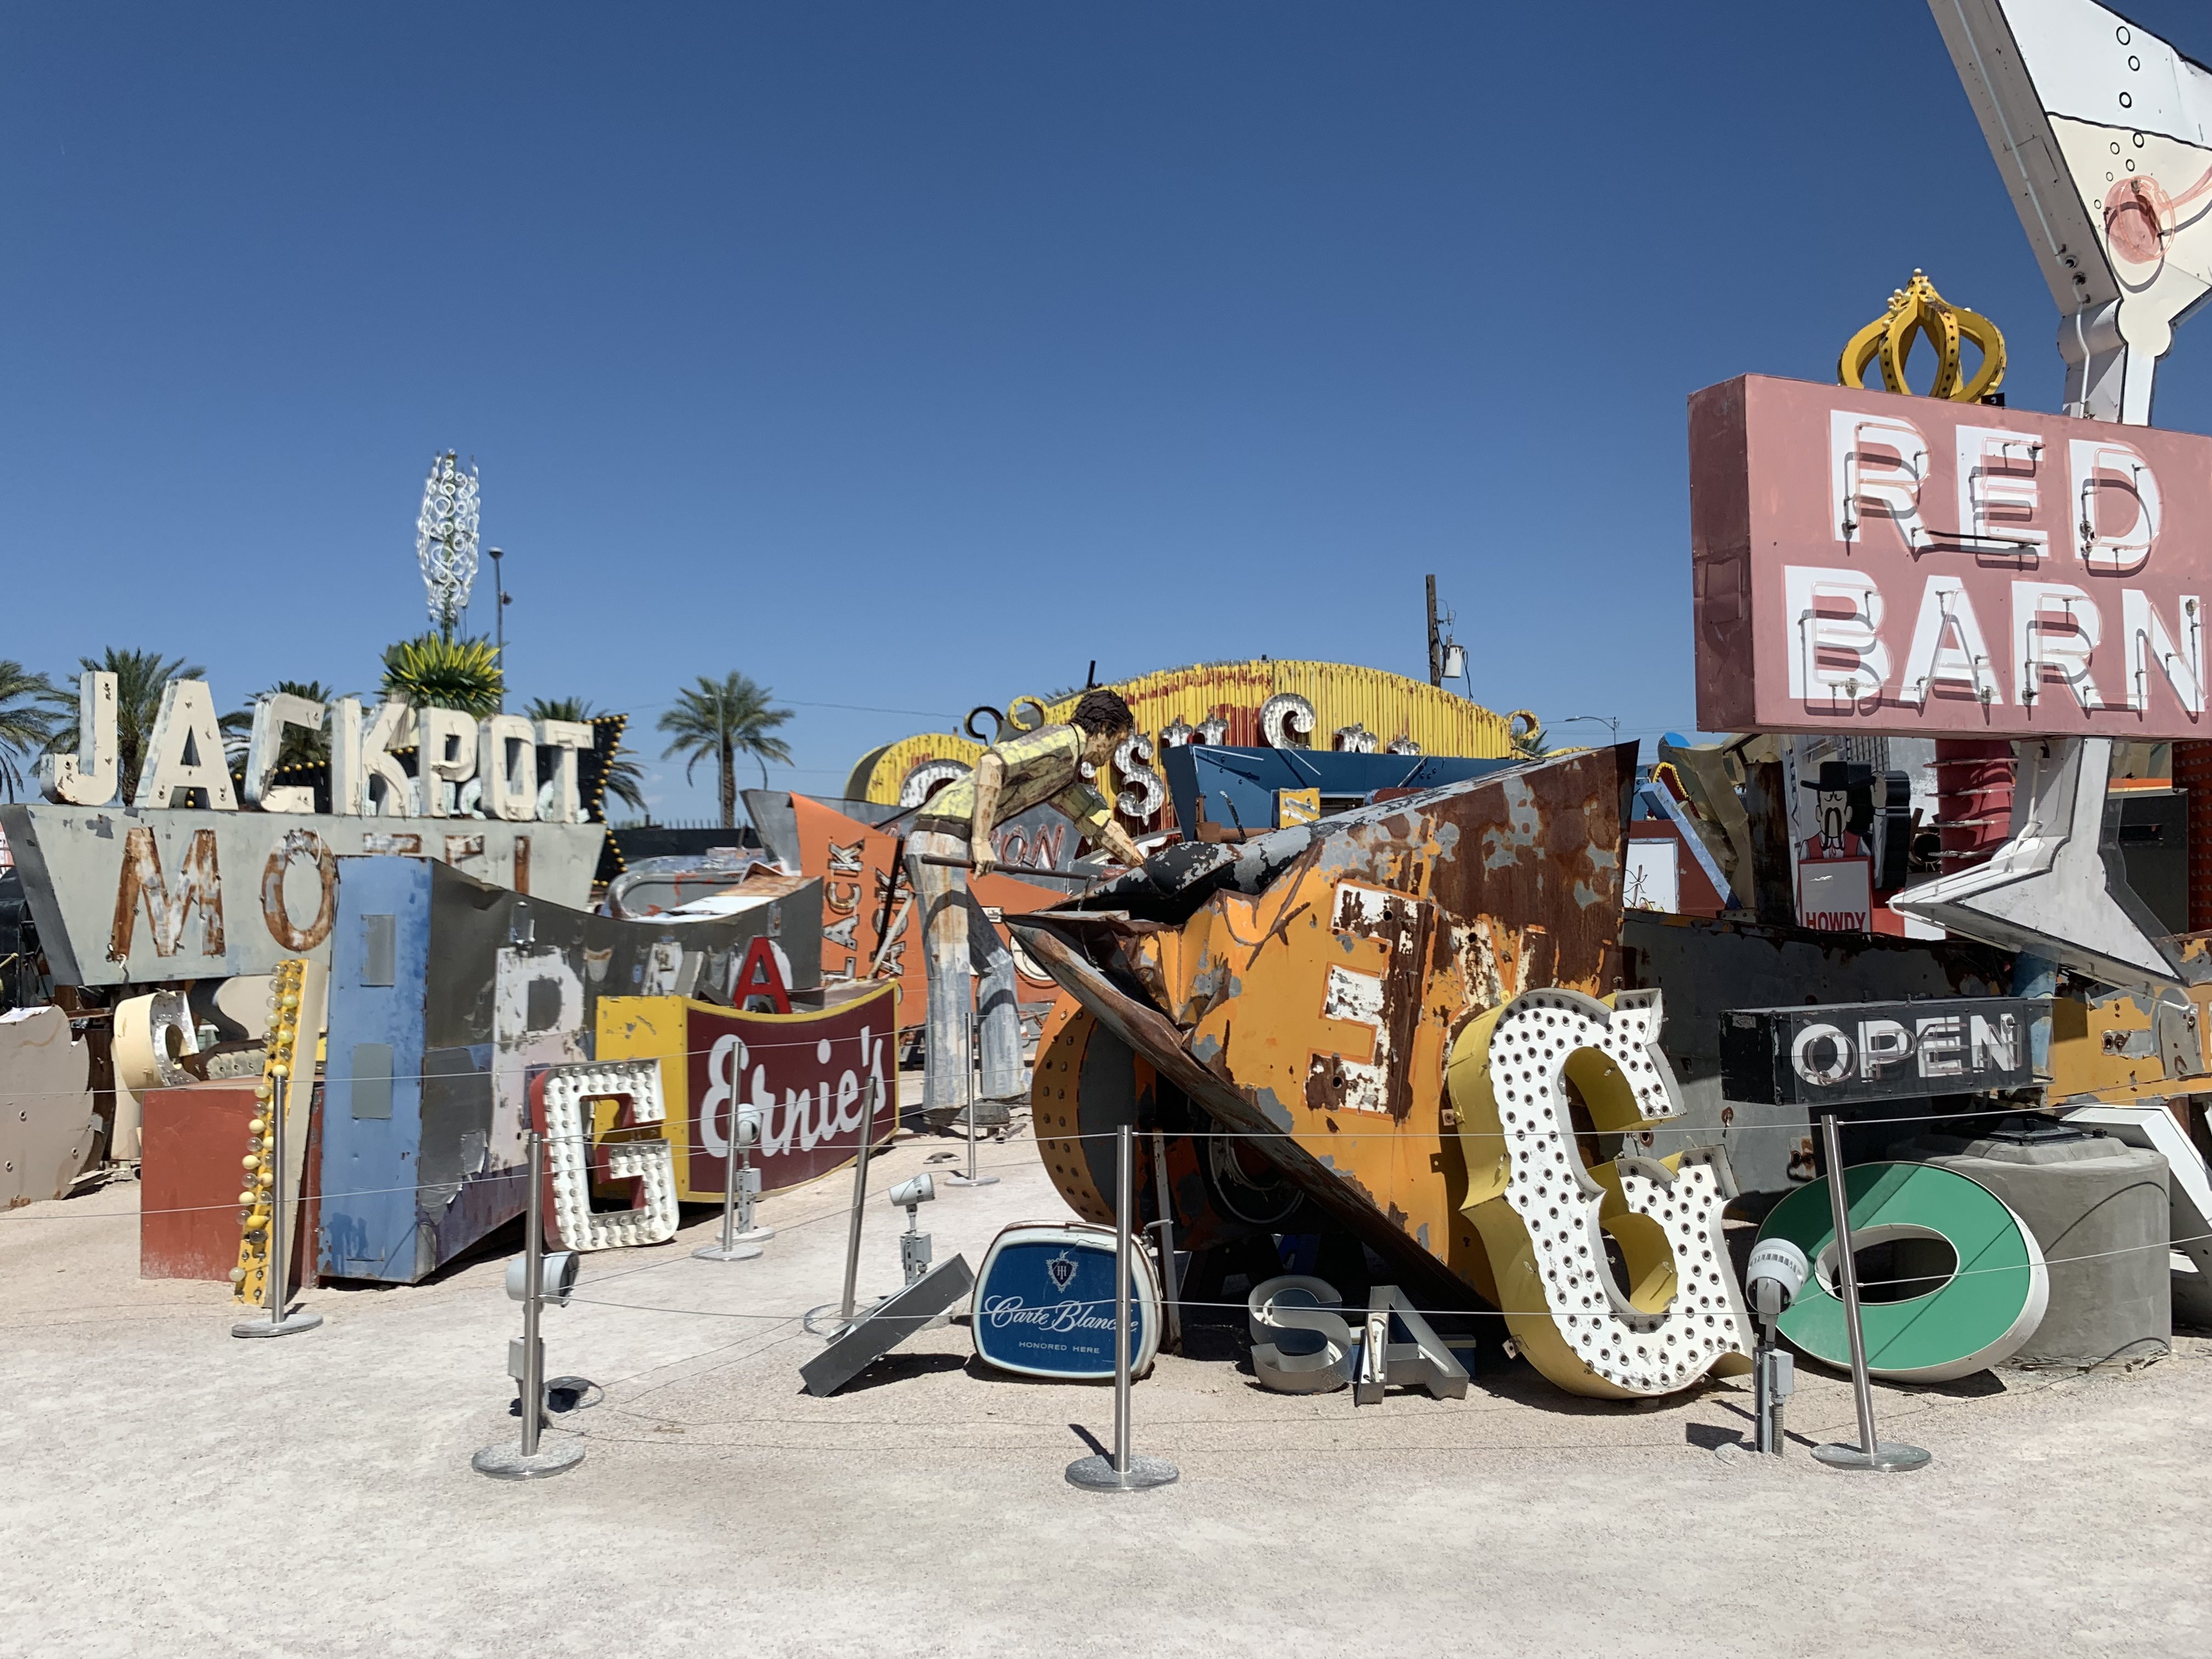 Take the kids to Las Vegas and check out the Neon Sign Museum